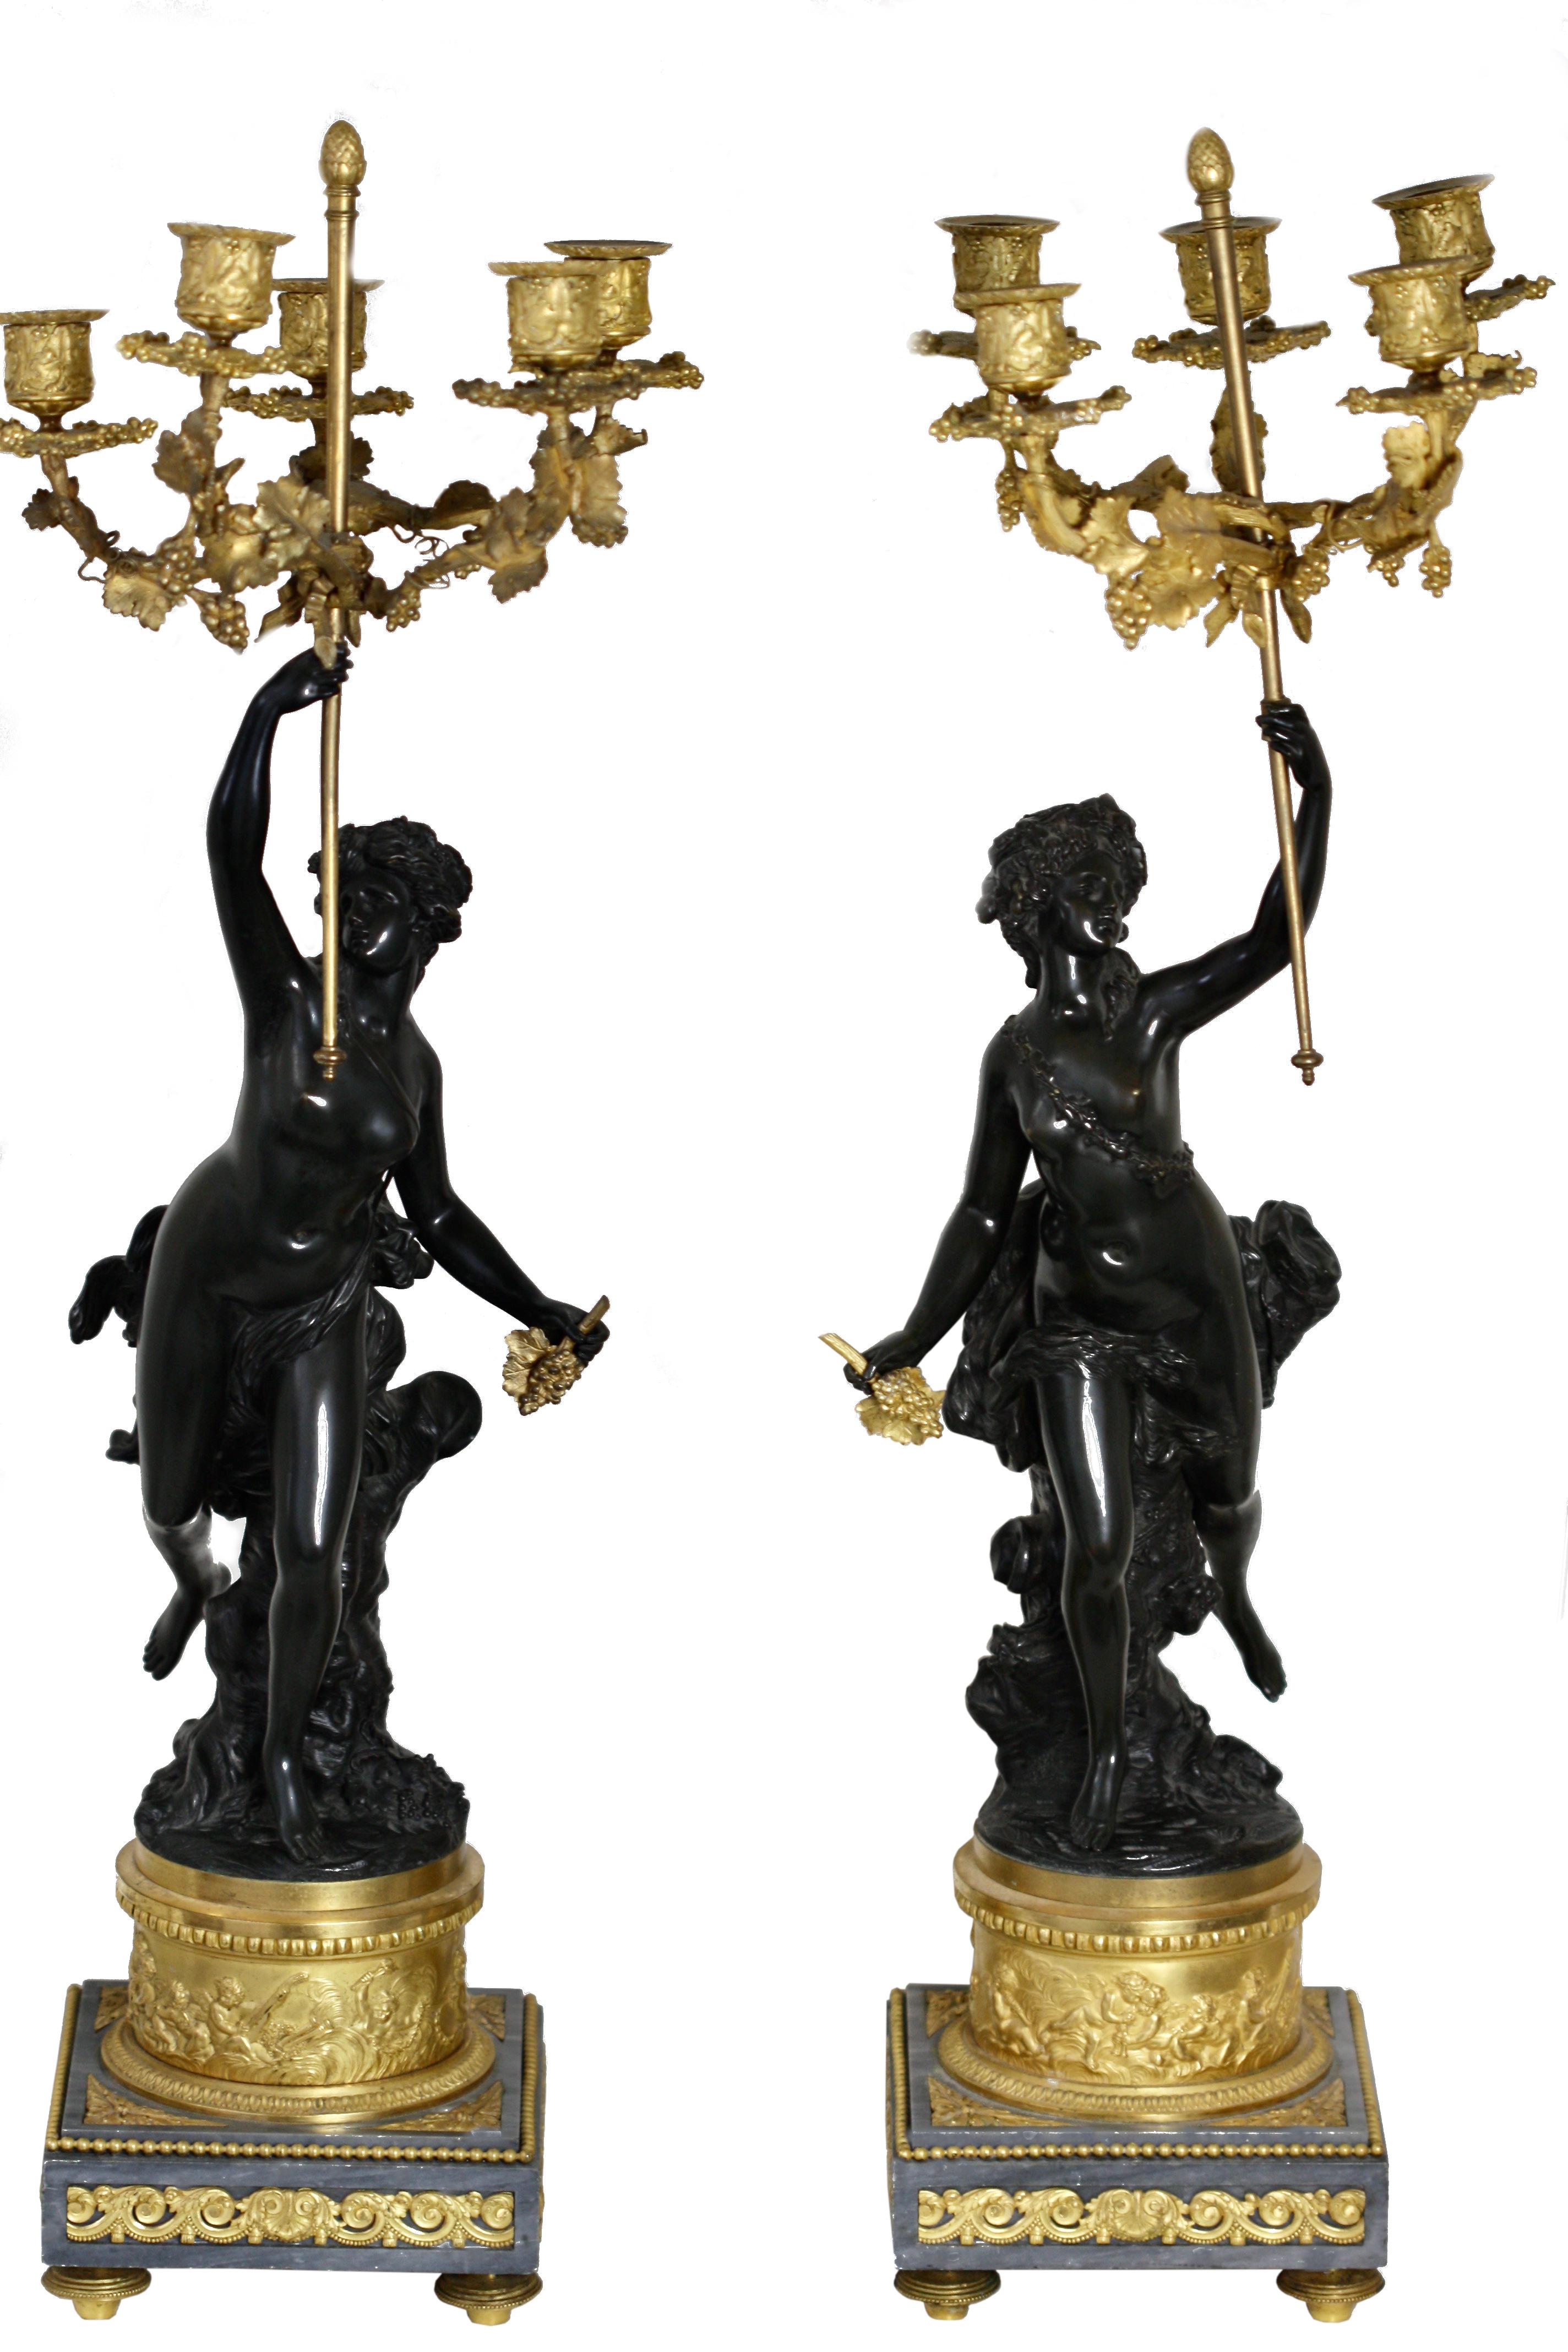 A fine pair of French gilt-and patinated-bronze and marble candelabra
late 19th century, after a model by Clodion, each standing female figure supporting five curved fluted candle branches
raised on turquin bleu marble surrounded by ormolu